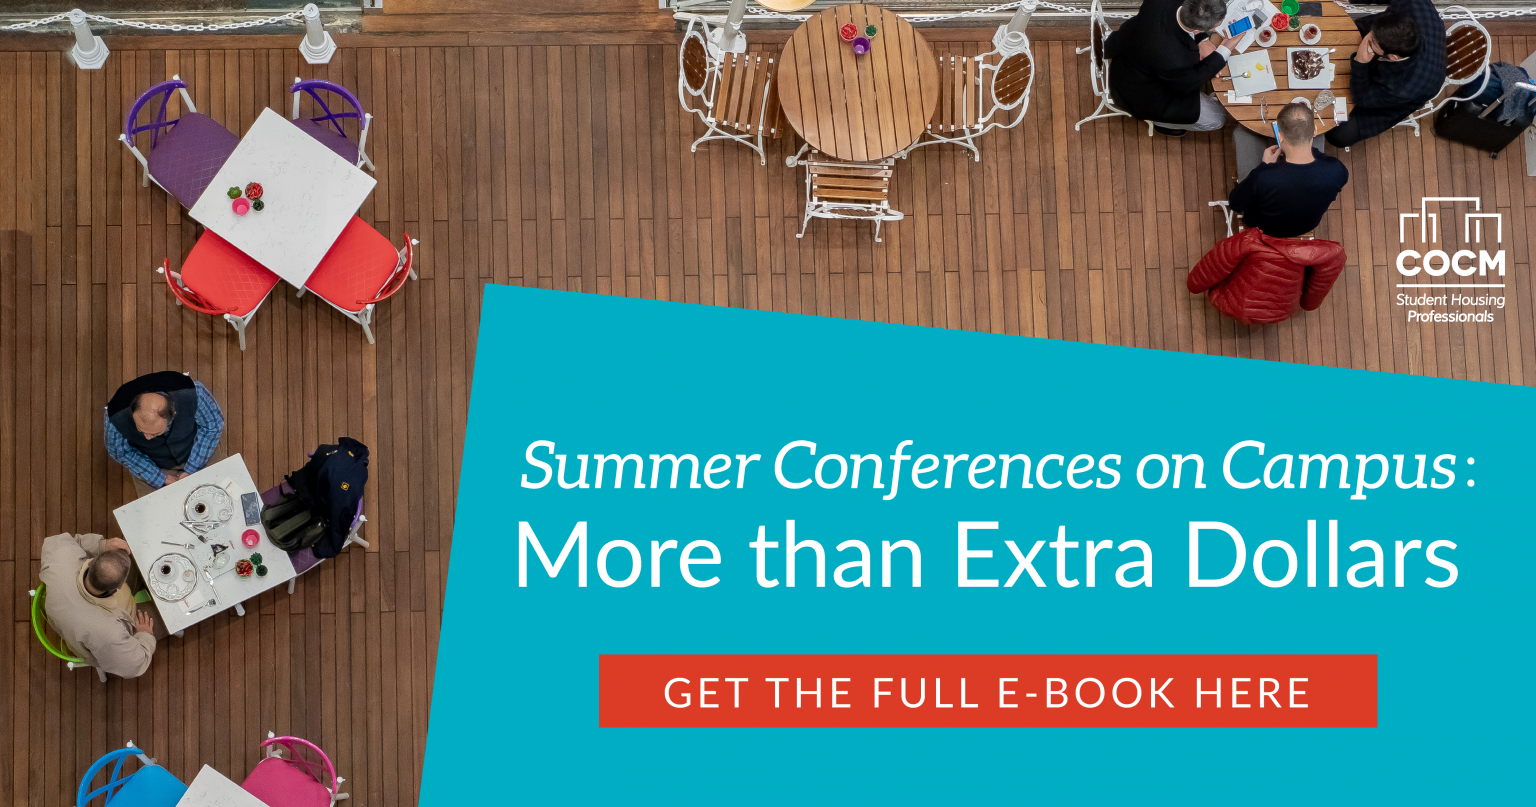 Summer Conferences on Campus More than Extra Dollars